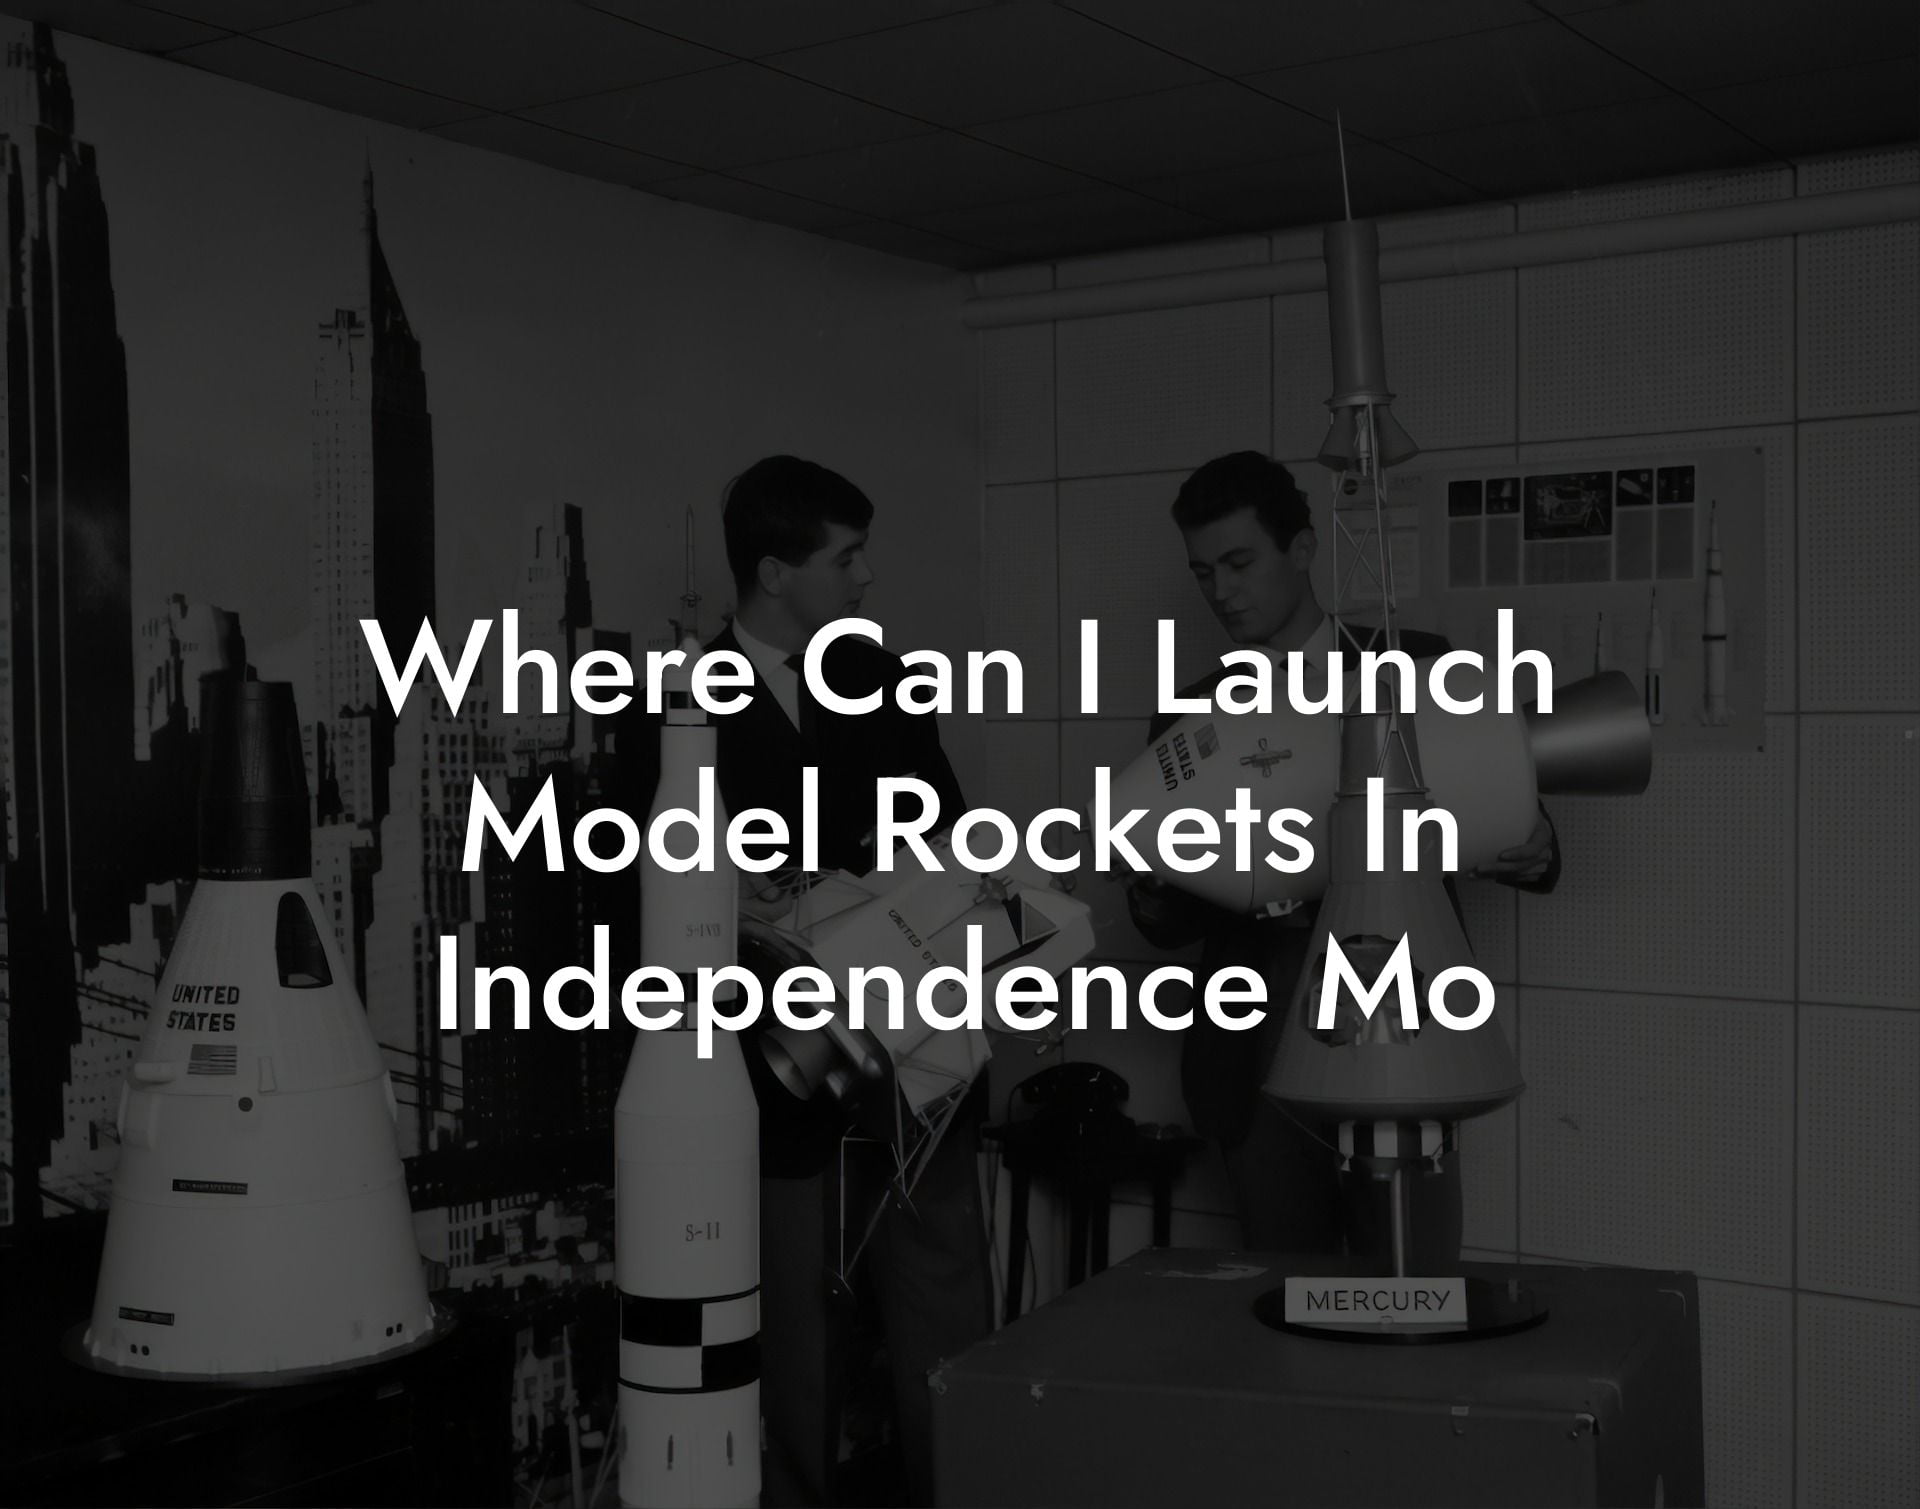 Where Can I Launch Model Rockets In Independence Mo